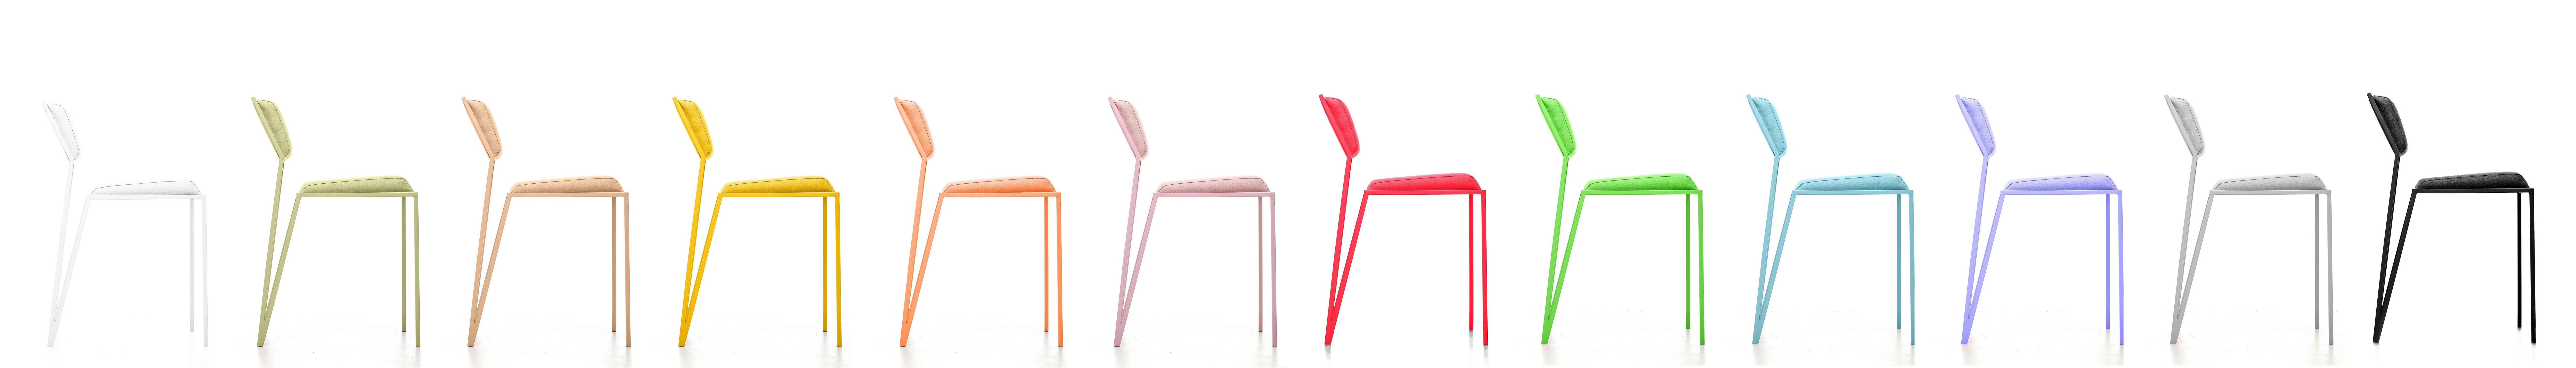 Painted Minimalist Chair in Steel, Brazilian Contemporary Style